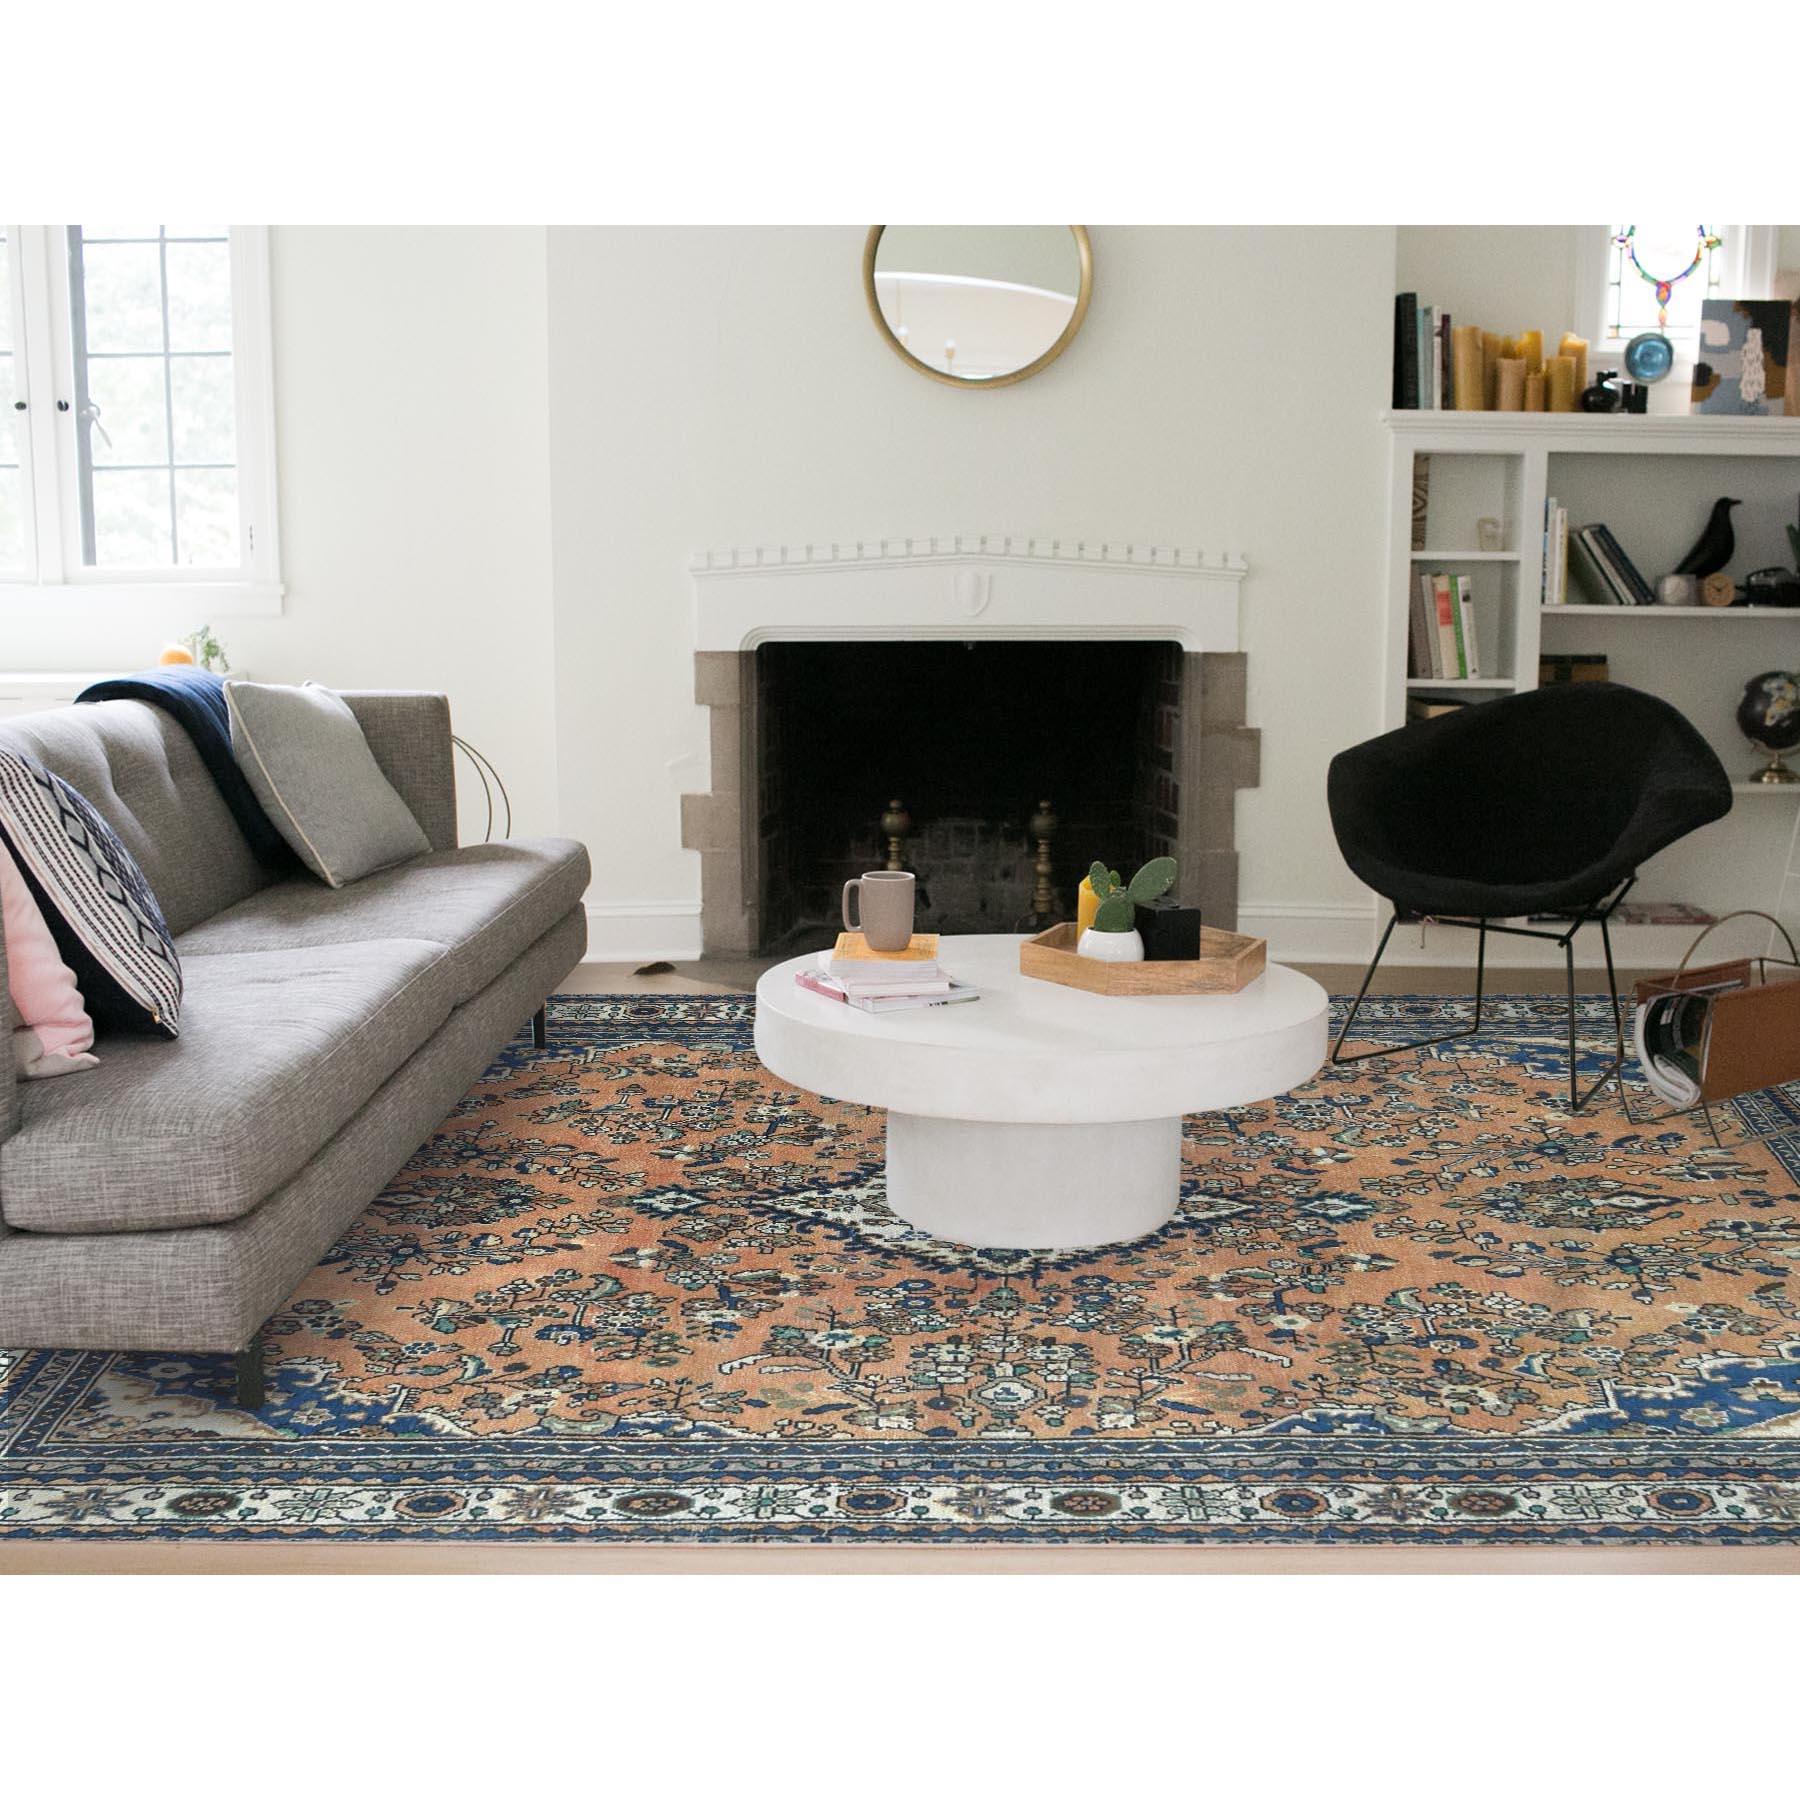 This fabulous Hand-Knotted carpet has been created and designed for extra strength and durability. This rug has been handcrafted for weeks in the traditional method that is used to make
Exact rug size in feet and inches : 8'0